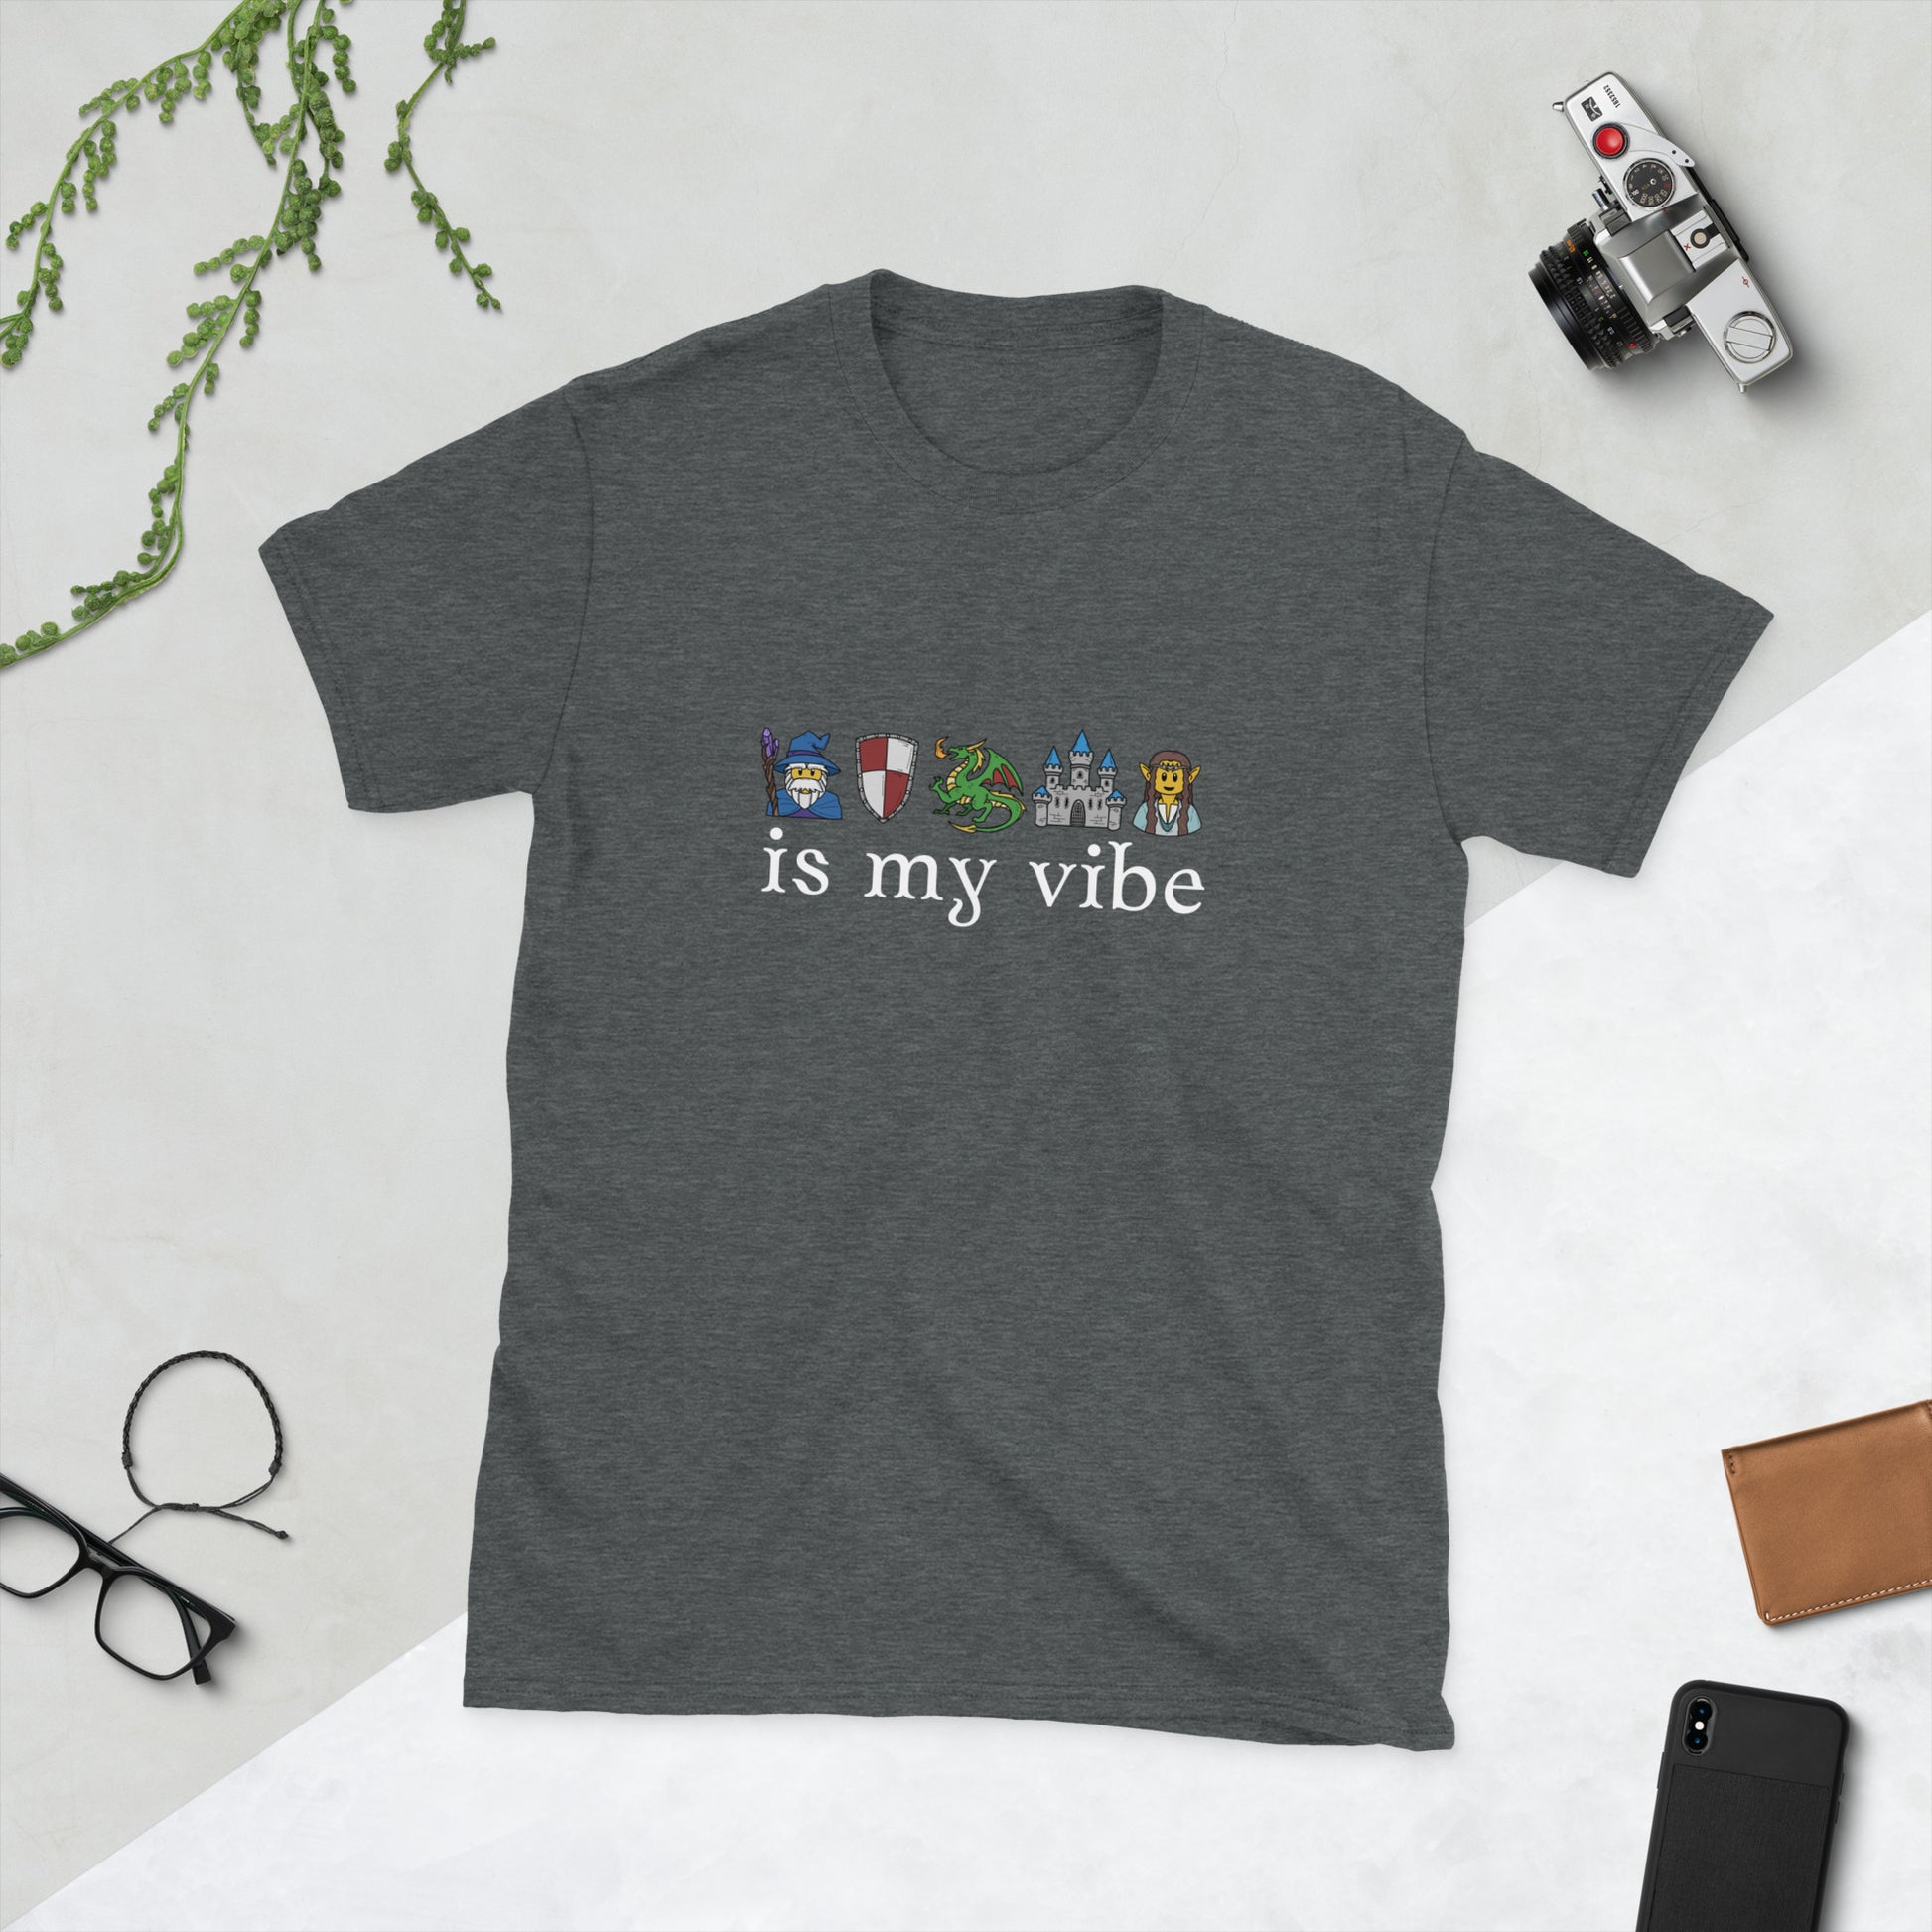 Fantasy is my vibe, medieval emoticon style Short-Sleeve Unisex T-Shirt  Level 1 Gamers Dark Heather S 